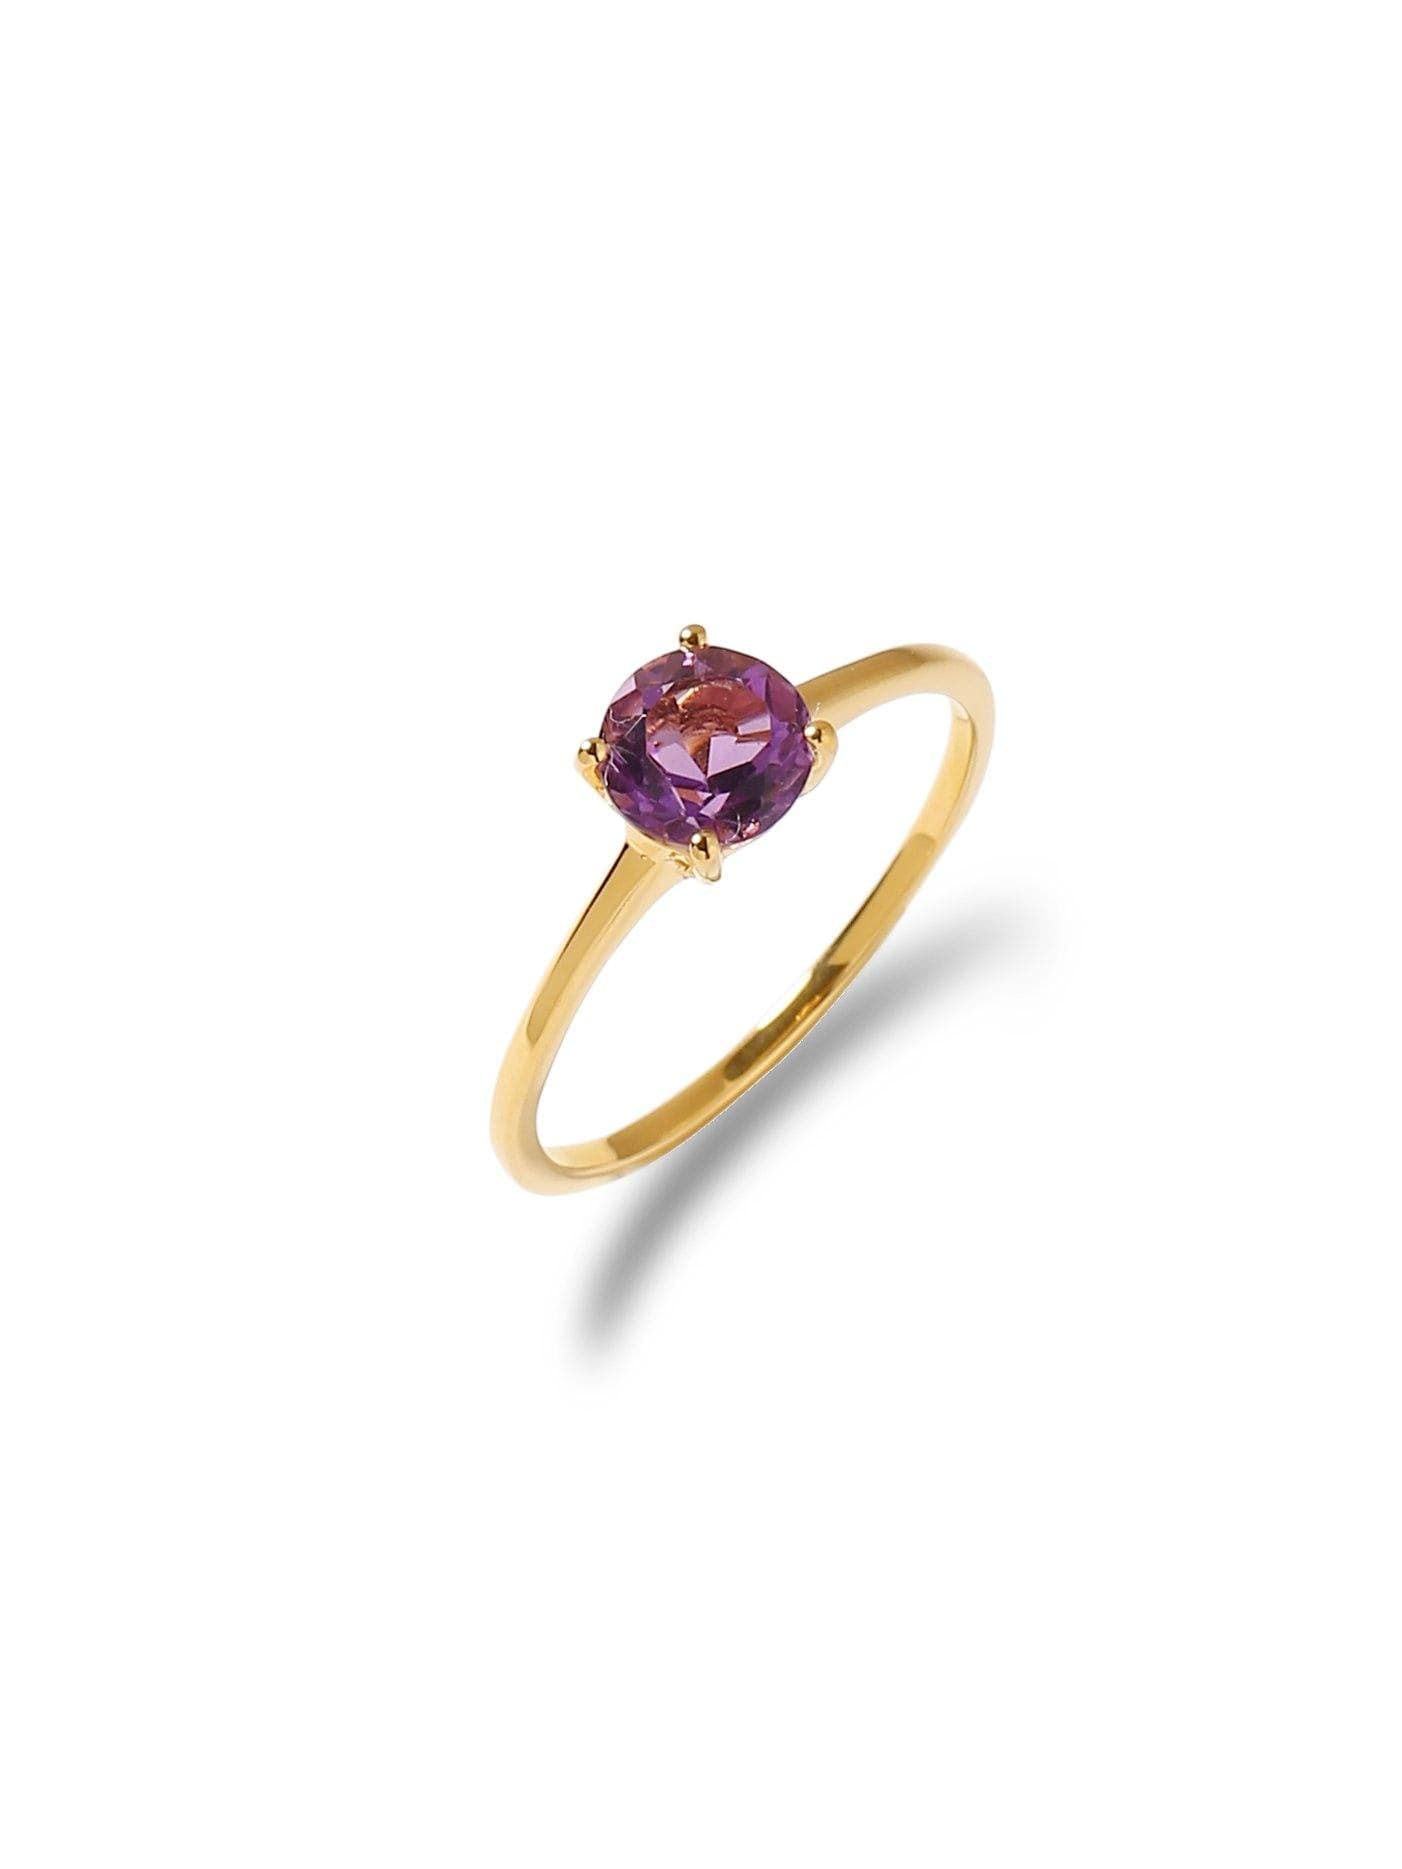 0.75 Ct Amethyst Solid 10k Yellow Gold Solitaire Ring Jewelry - YoTreasure